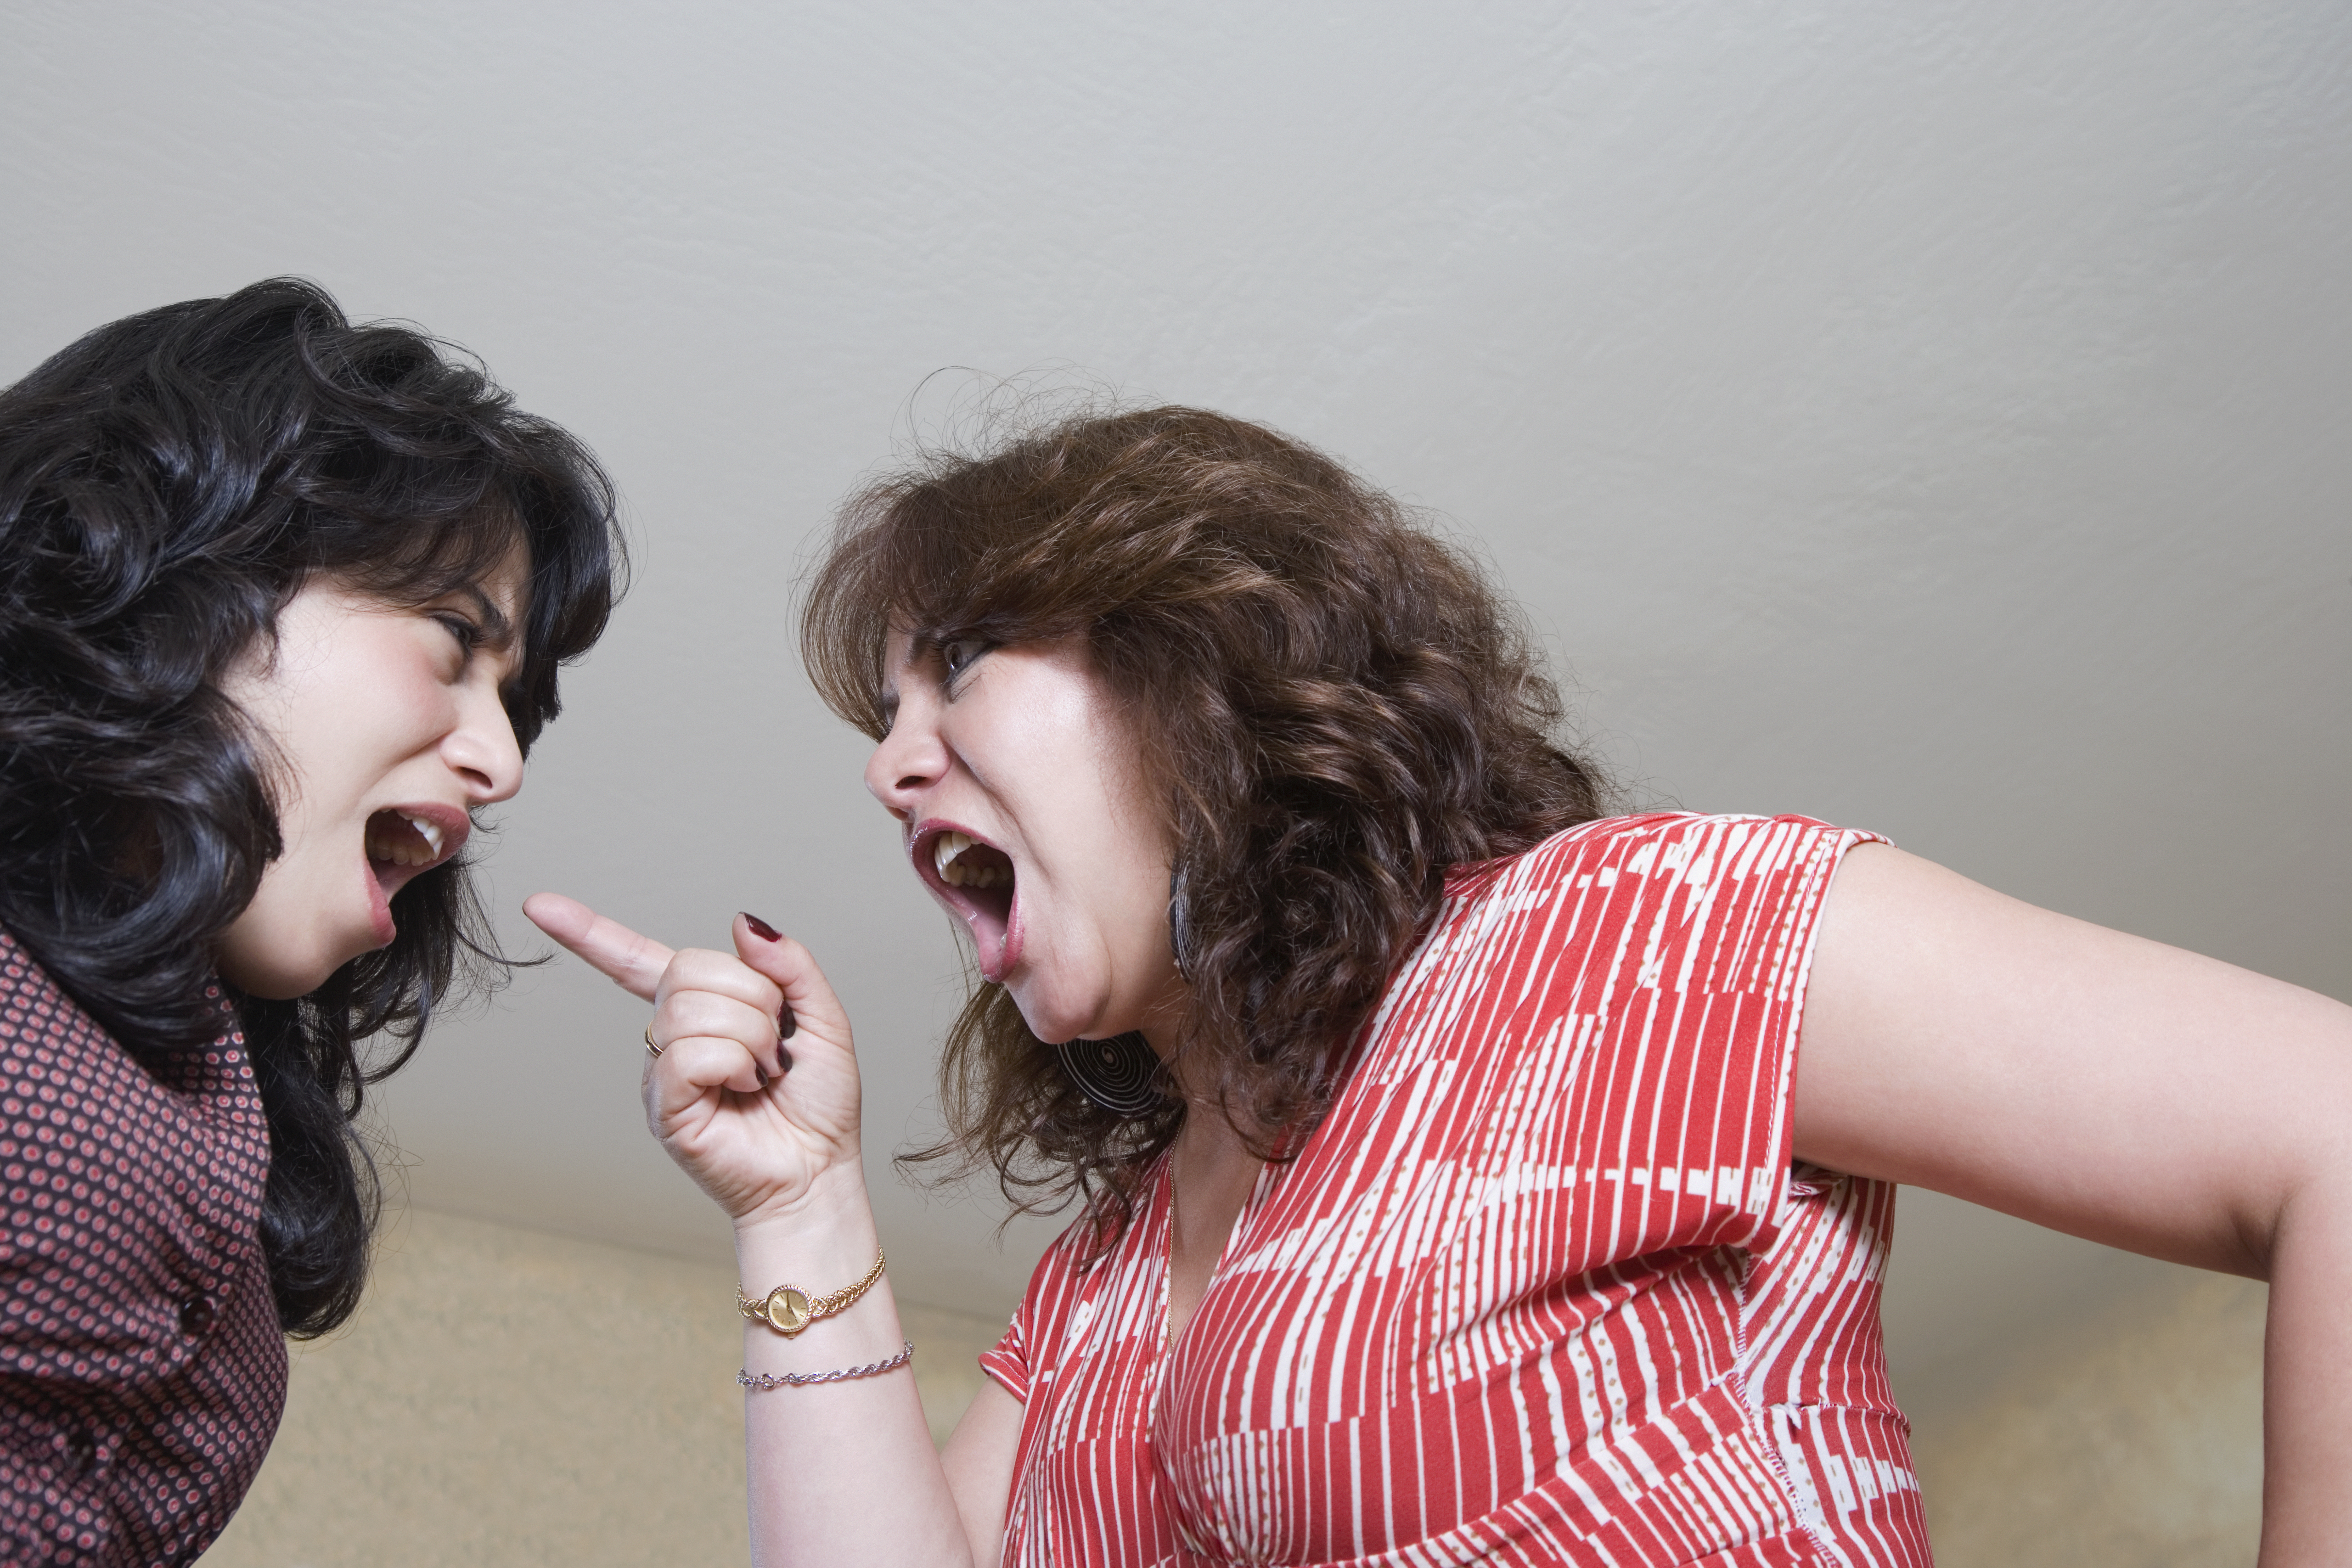 Two women fighting | Source: Getty Images